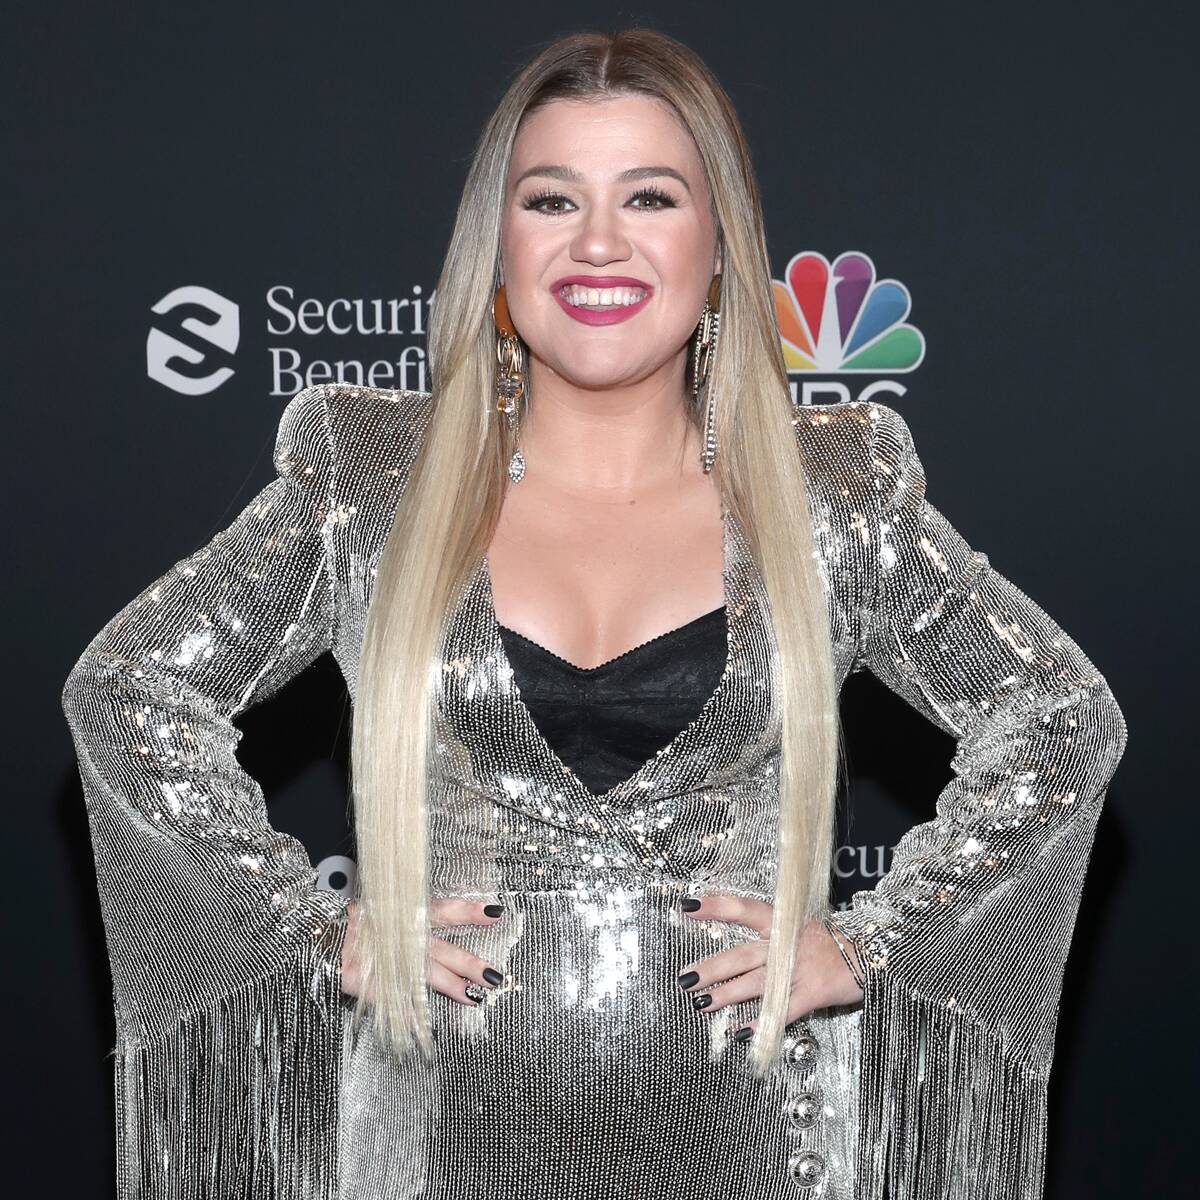 Kelly Clarkson Reveals She Can't "Imagine" Getting Married Again After Divorcing Brandon Blackstock